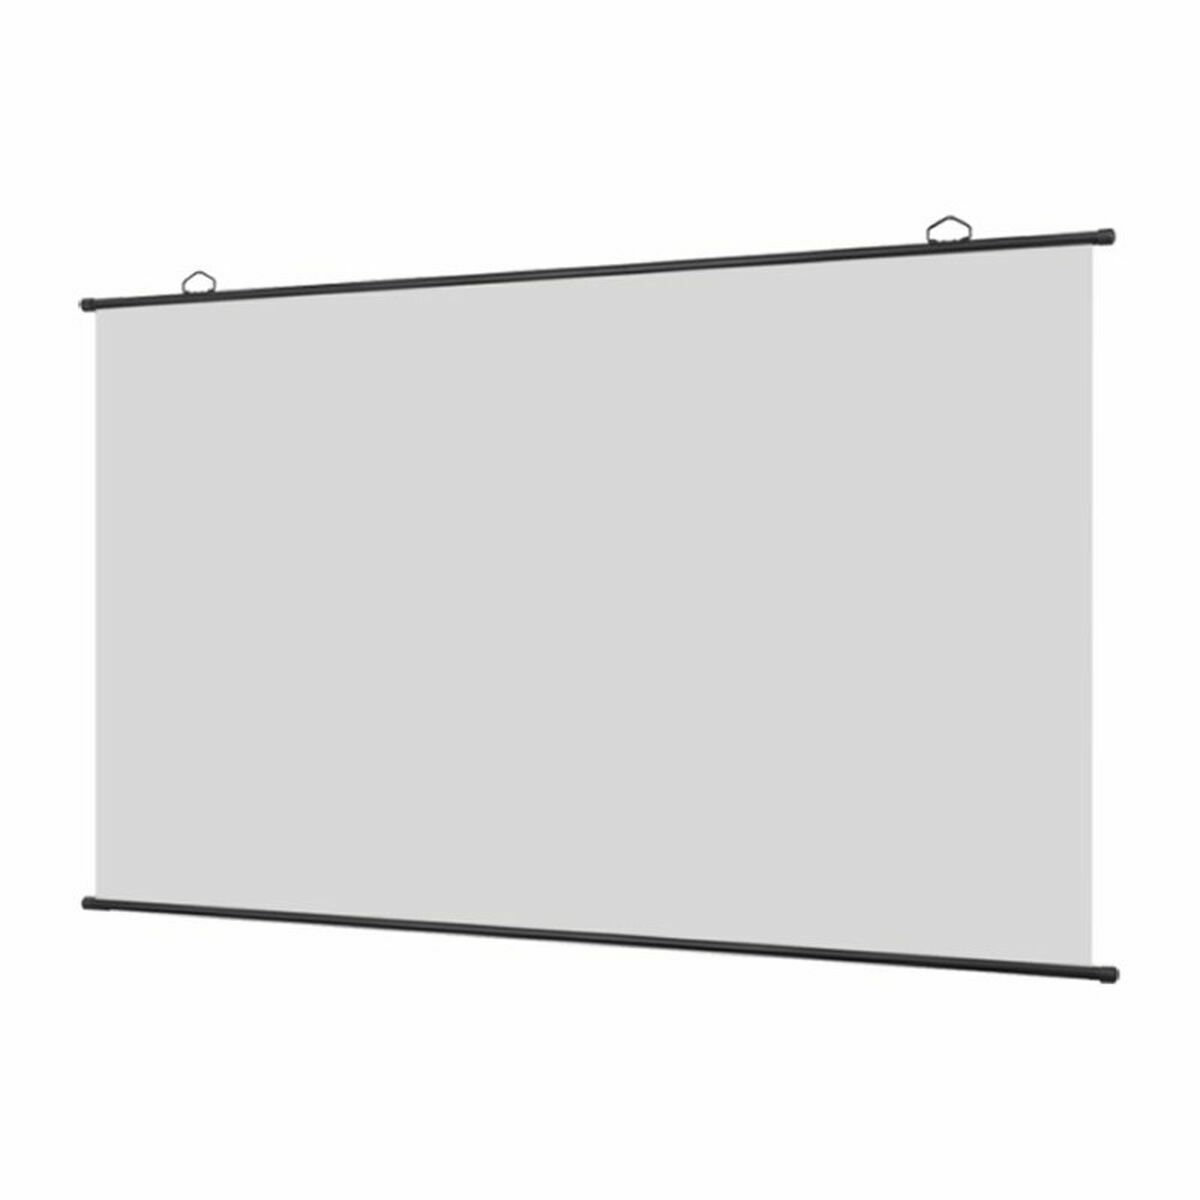 Projection Screen iggual IGG318102 100", iggual, Electronics, TV, Video and home cinema, projection-screen-iggual-igg318102-101, Brand_iggual, category-reference-2609, category-reference-2642, category-reference-2852, category-reference-t-18805, category-reference-t-19653, category-reference-t-19921, category-reference-t-21391, category-reference-t-25697, cinema and television, computers / peripherals, Condition_NEW, entertainment, office, Price_50 - 100, RiotNook